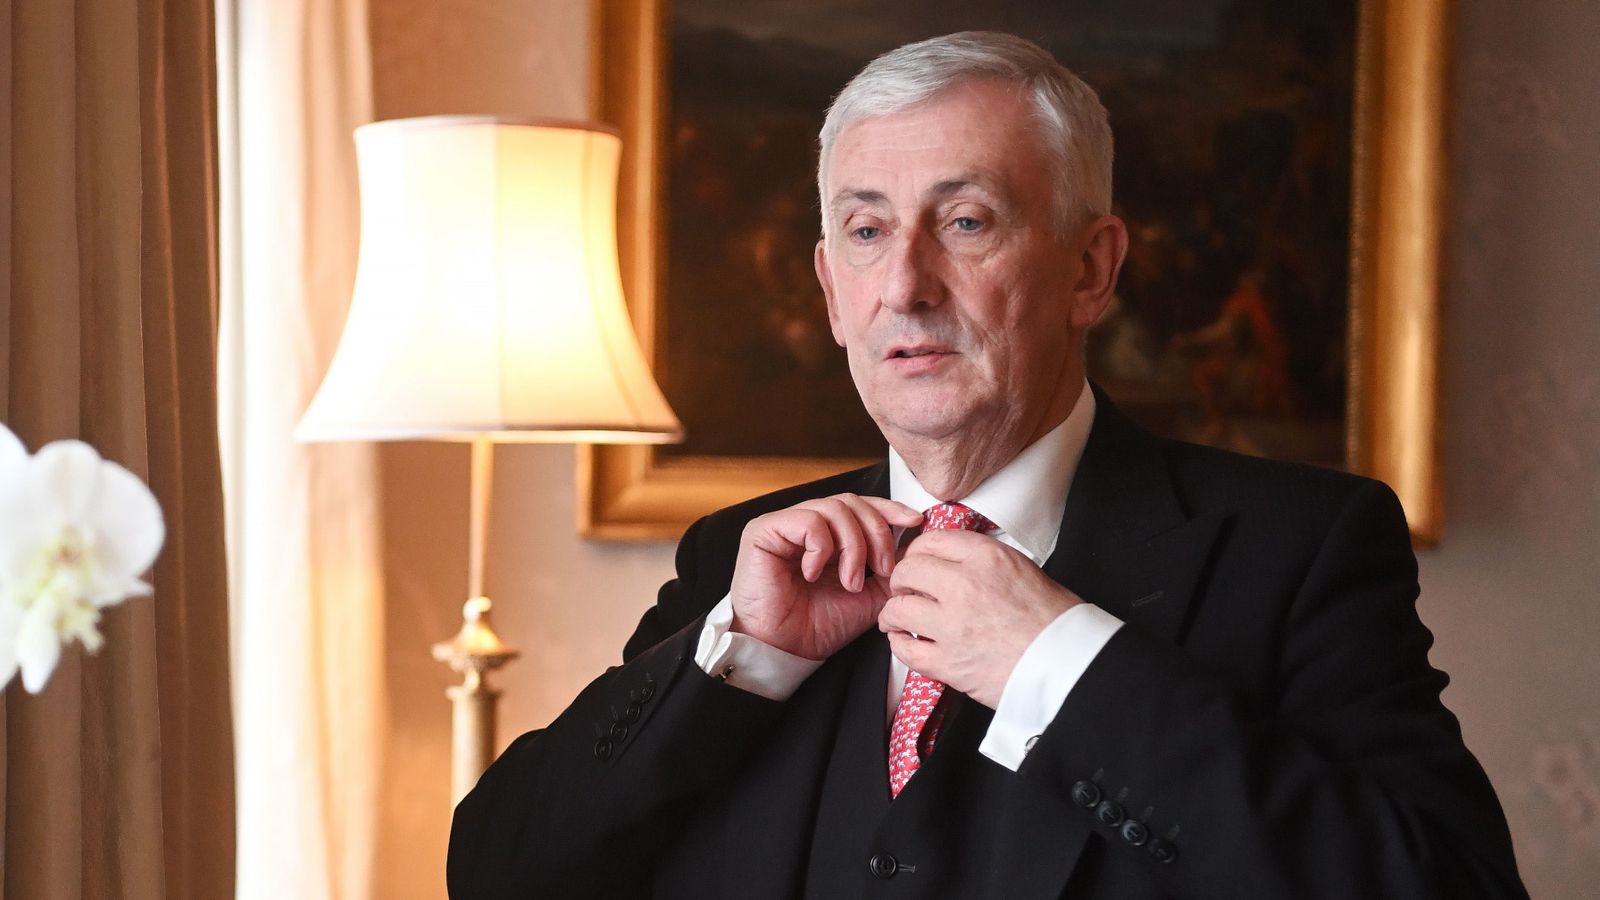 Speaker Sir Lindsay Hoyle retracts offer to SNP for emergency ceasefire debate